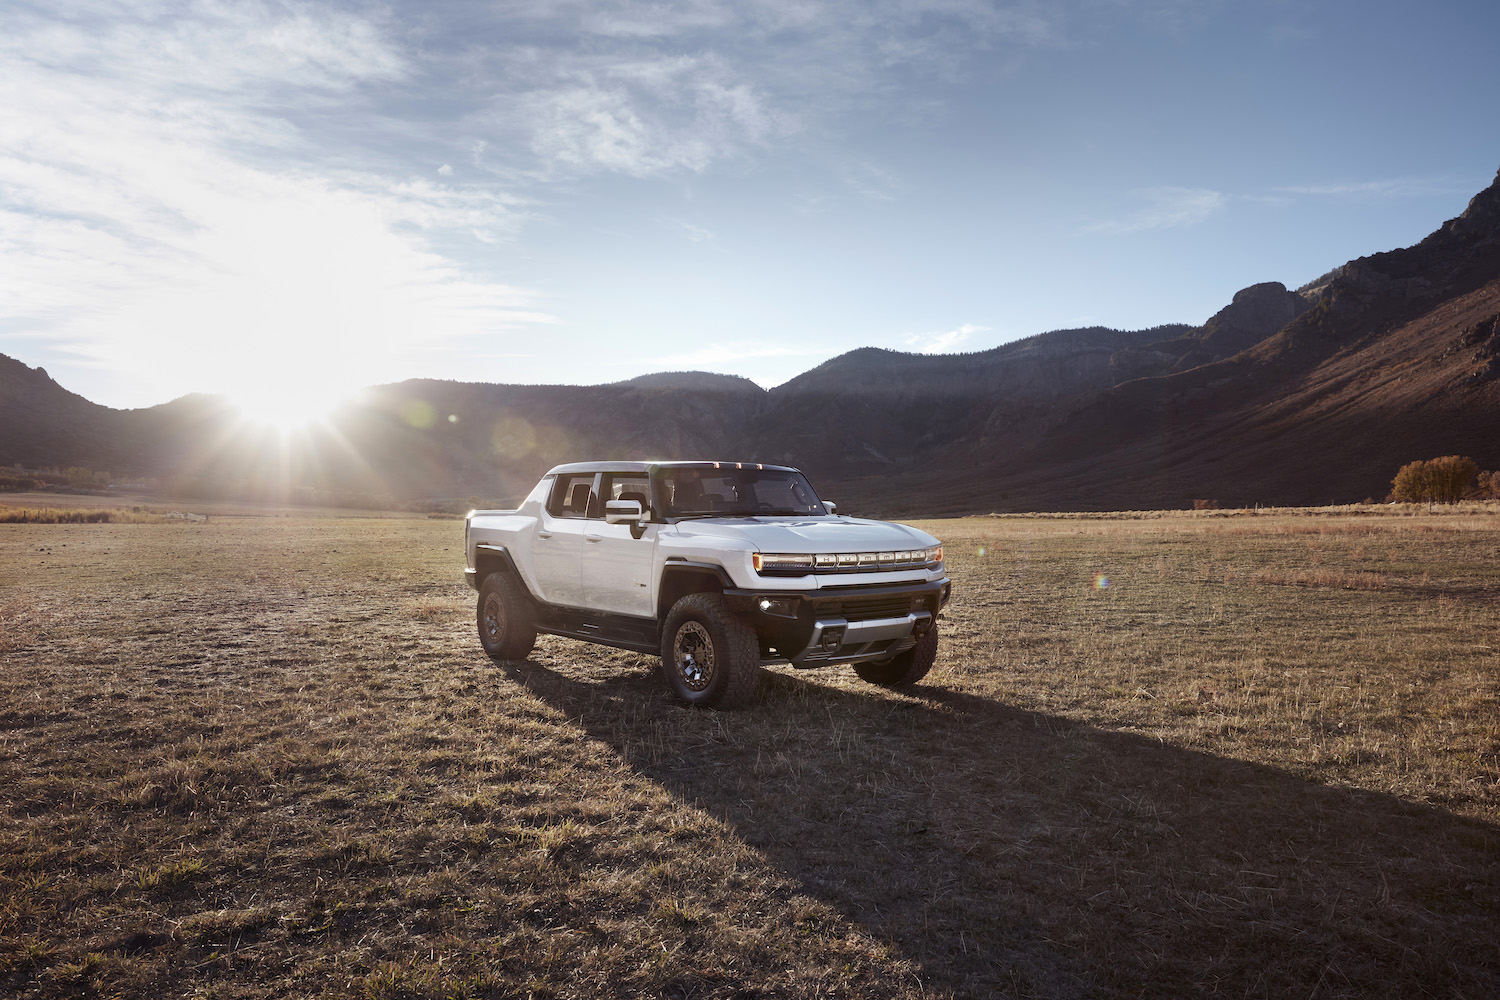 The 2022 GMC Hummer EV Pickup hits the desert with a mountain backdrop.